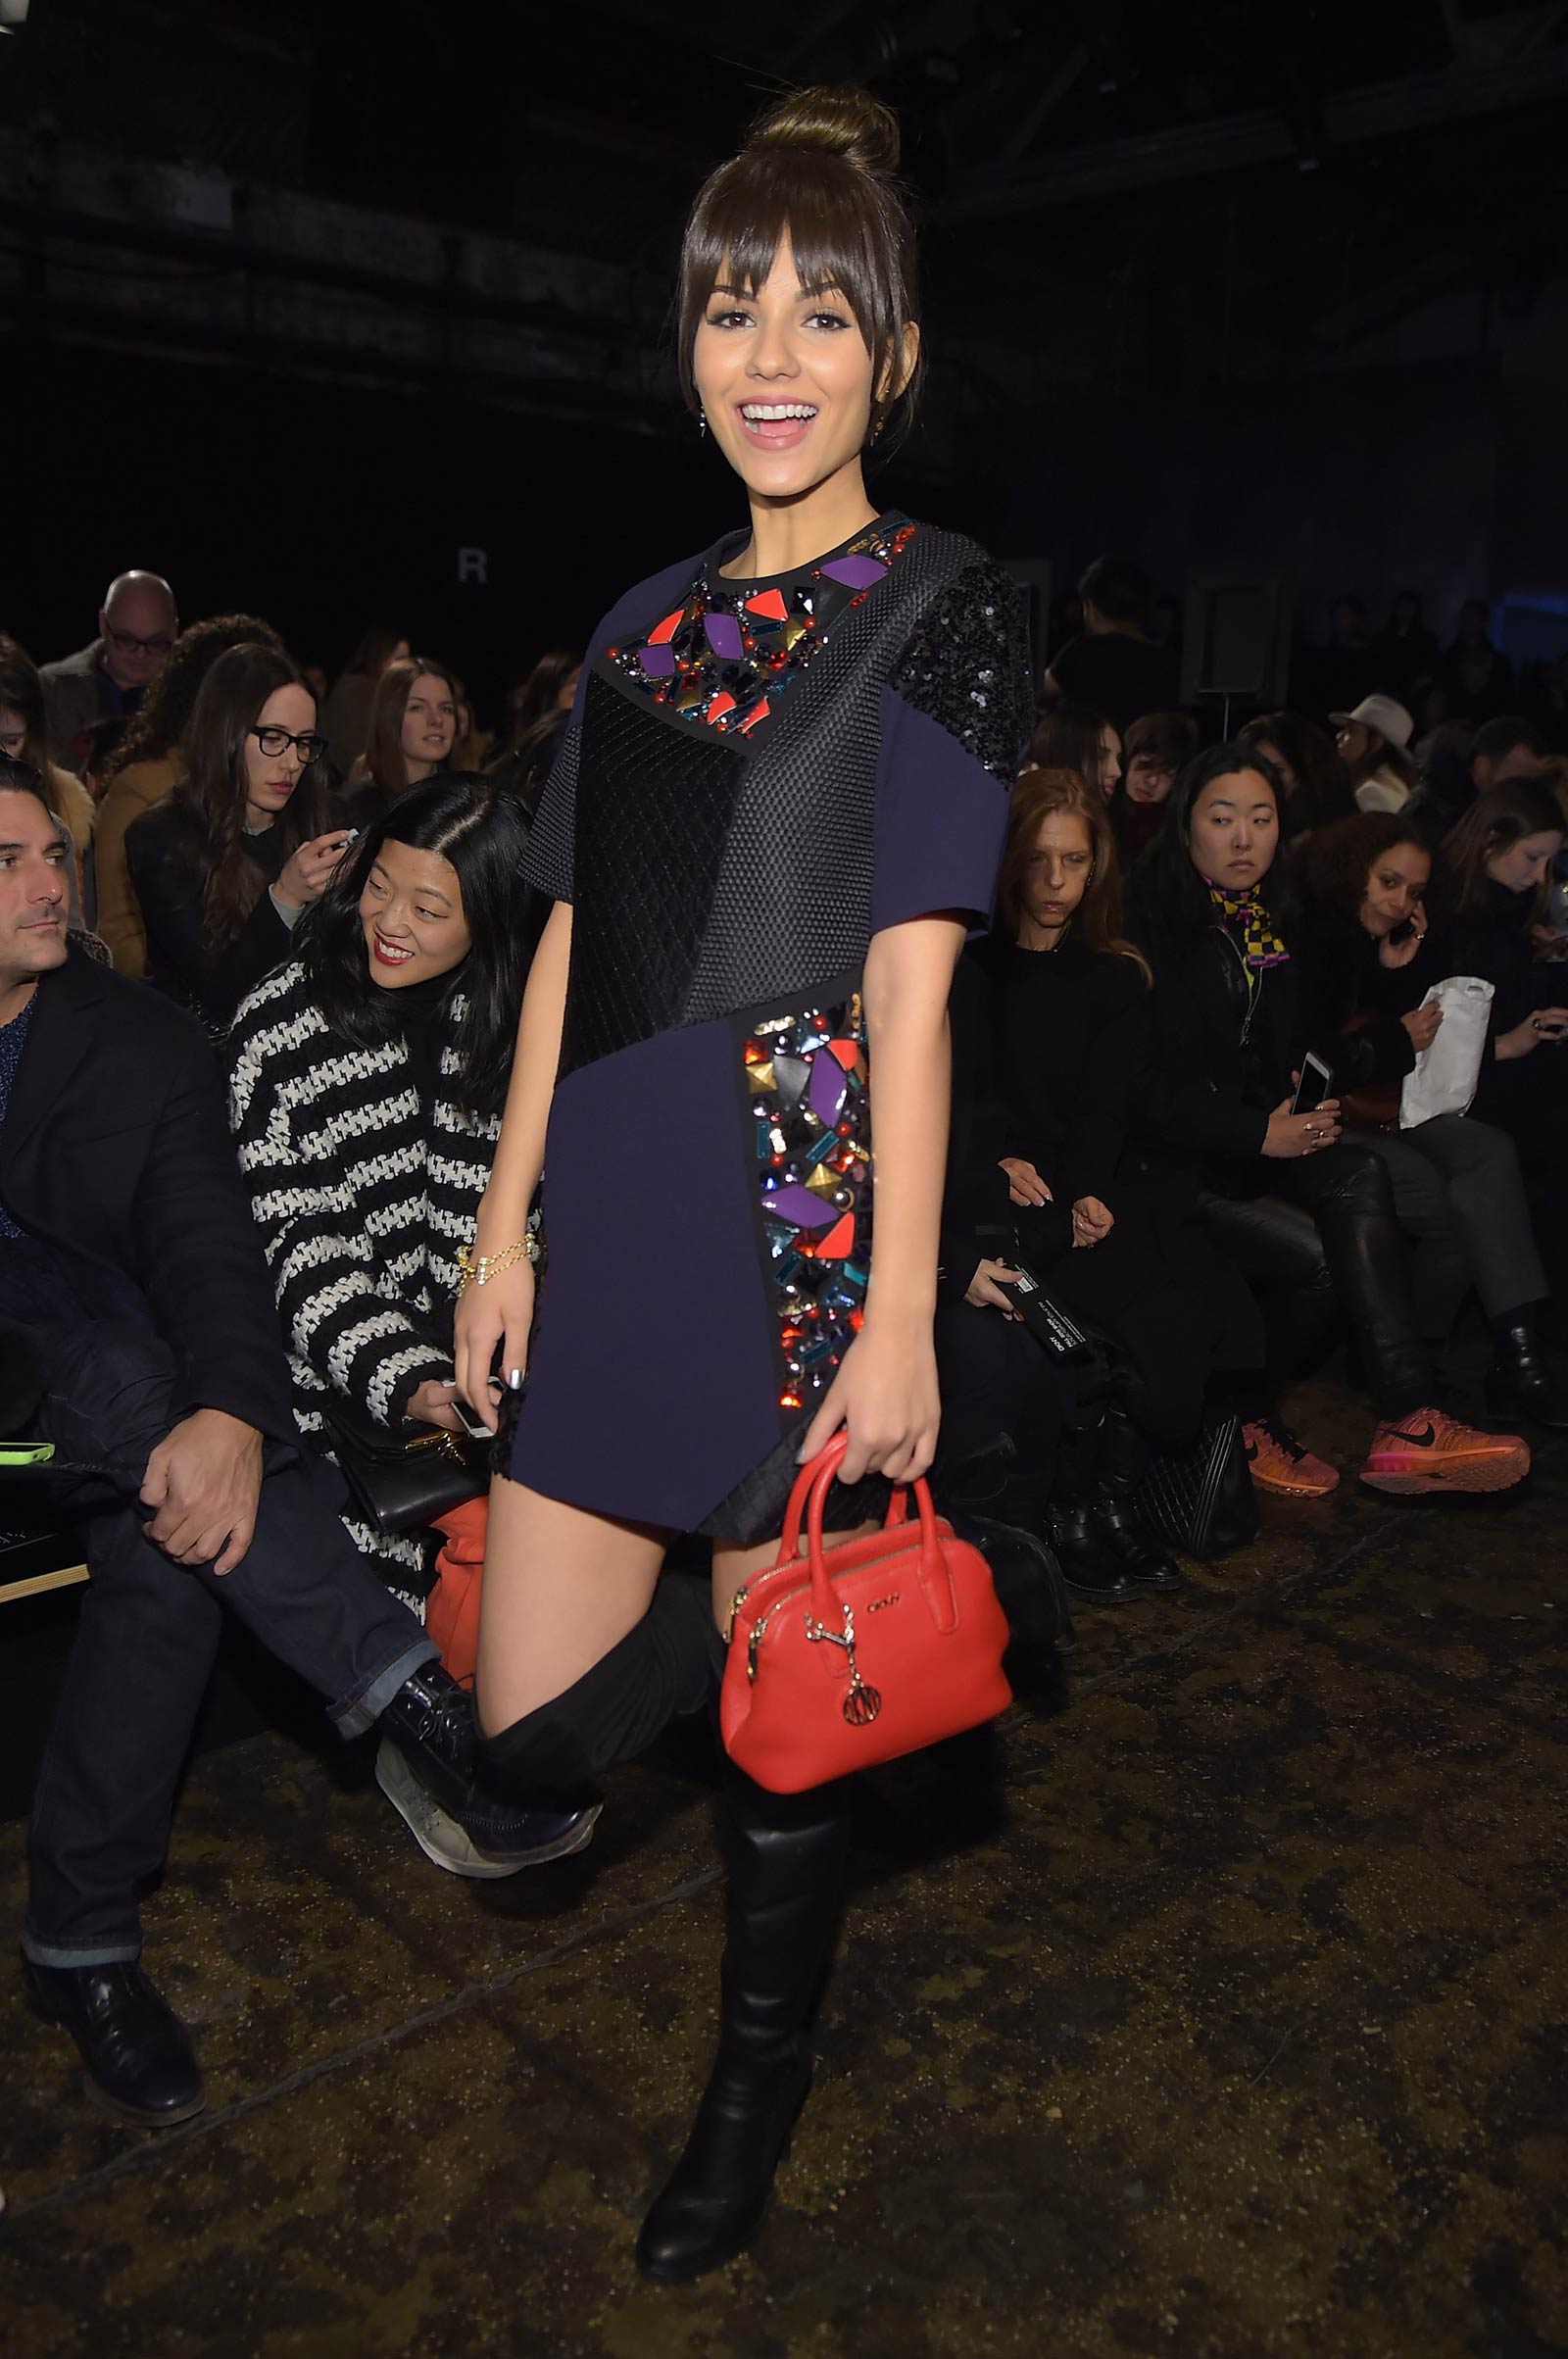 Victoria Justice attends DKNY Fashion Show